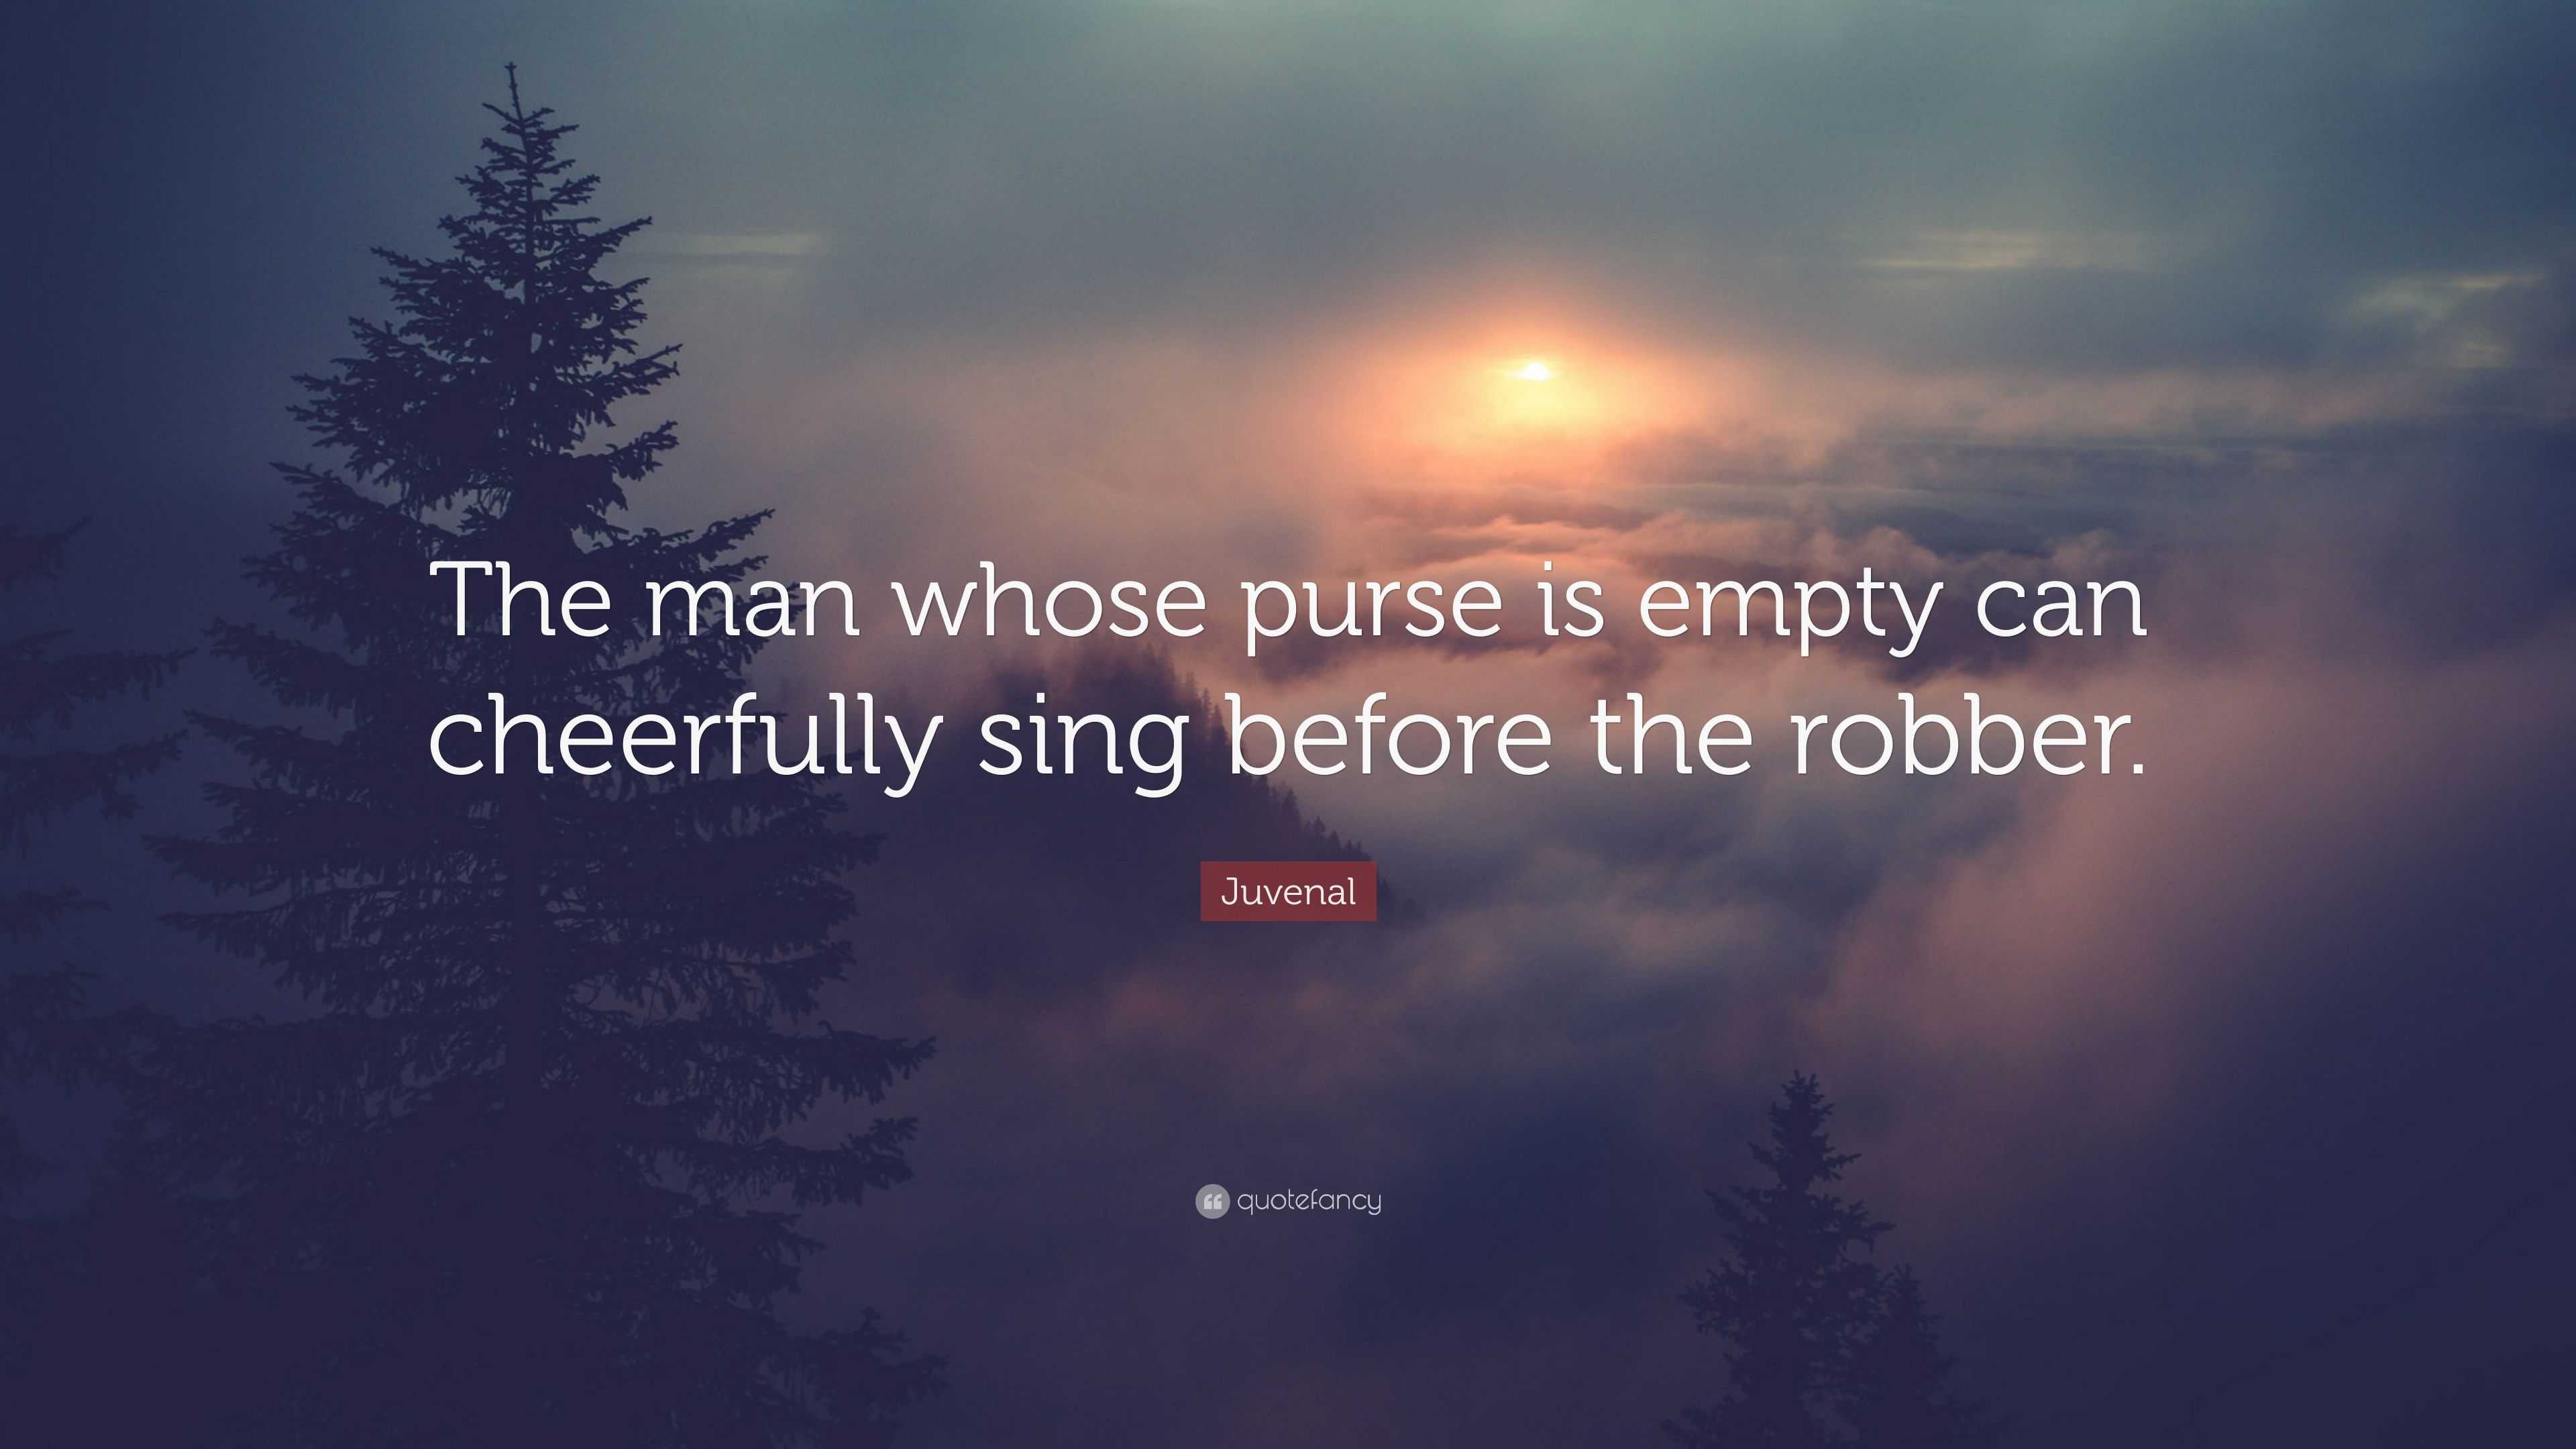 5560600 Juvenal Quote The man whose purse is empty can cheerfully sing